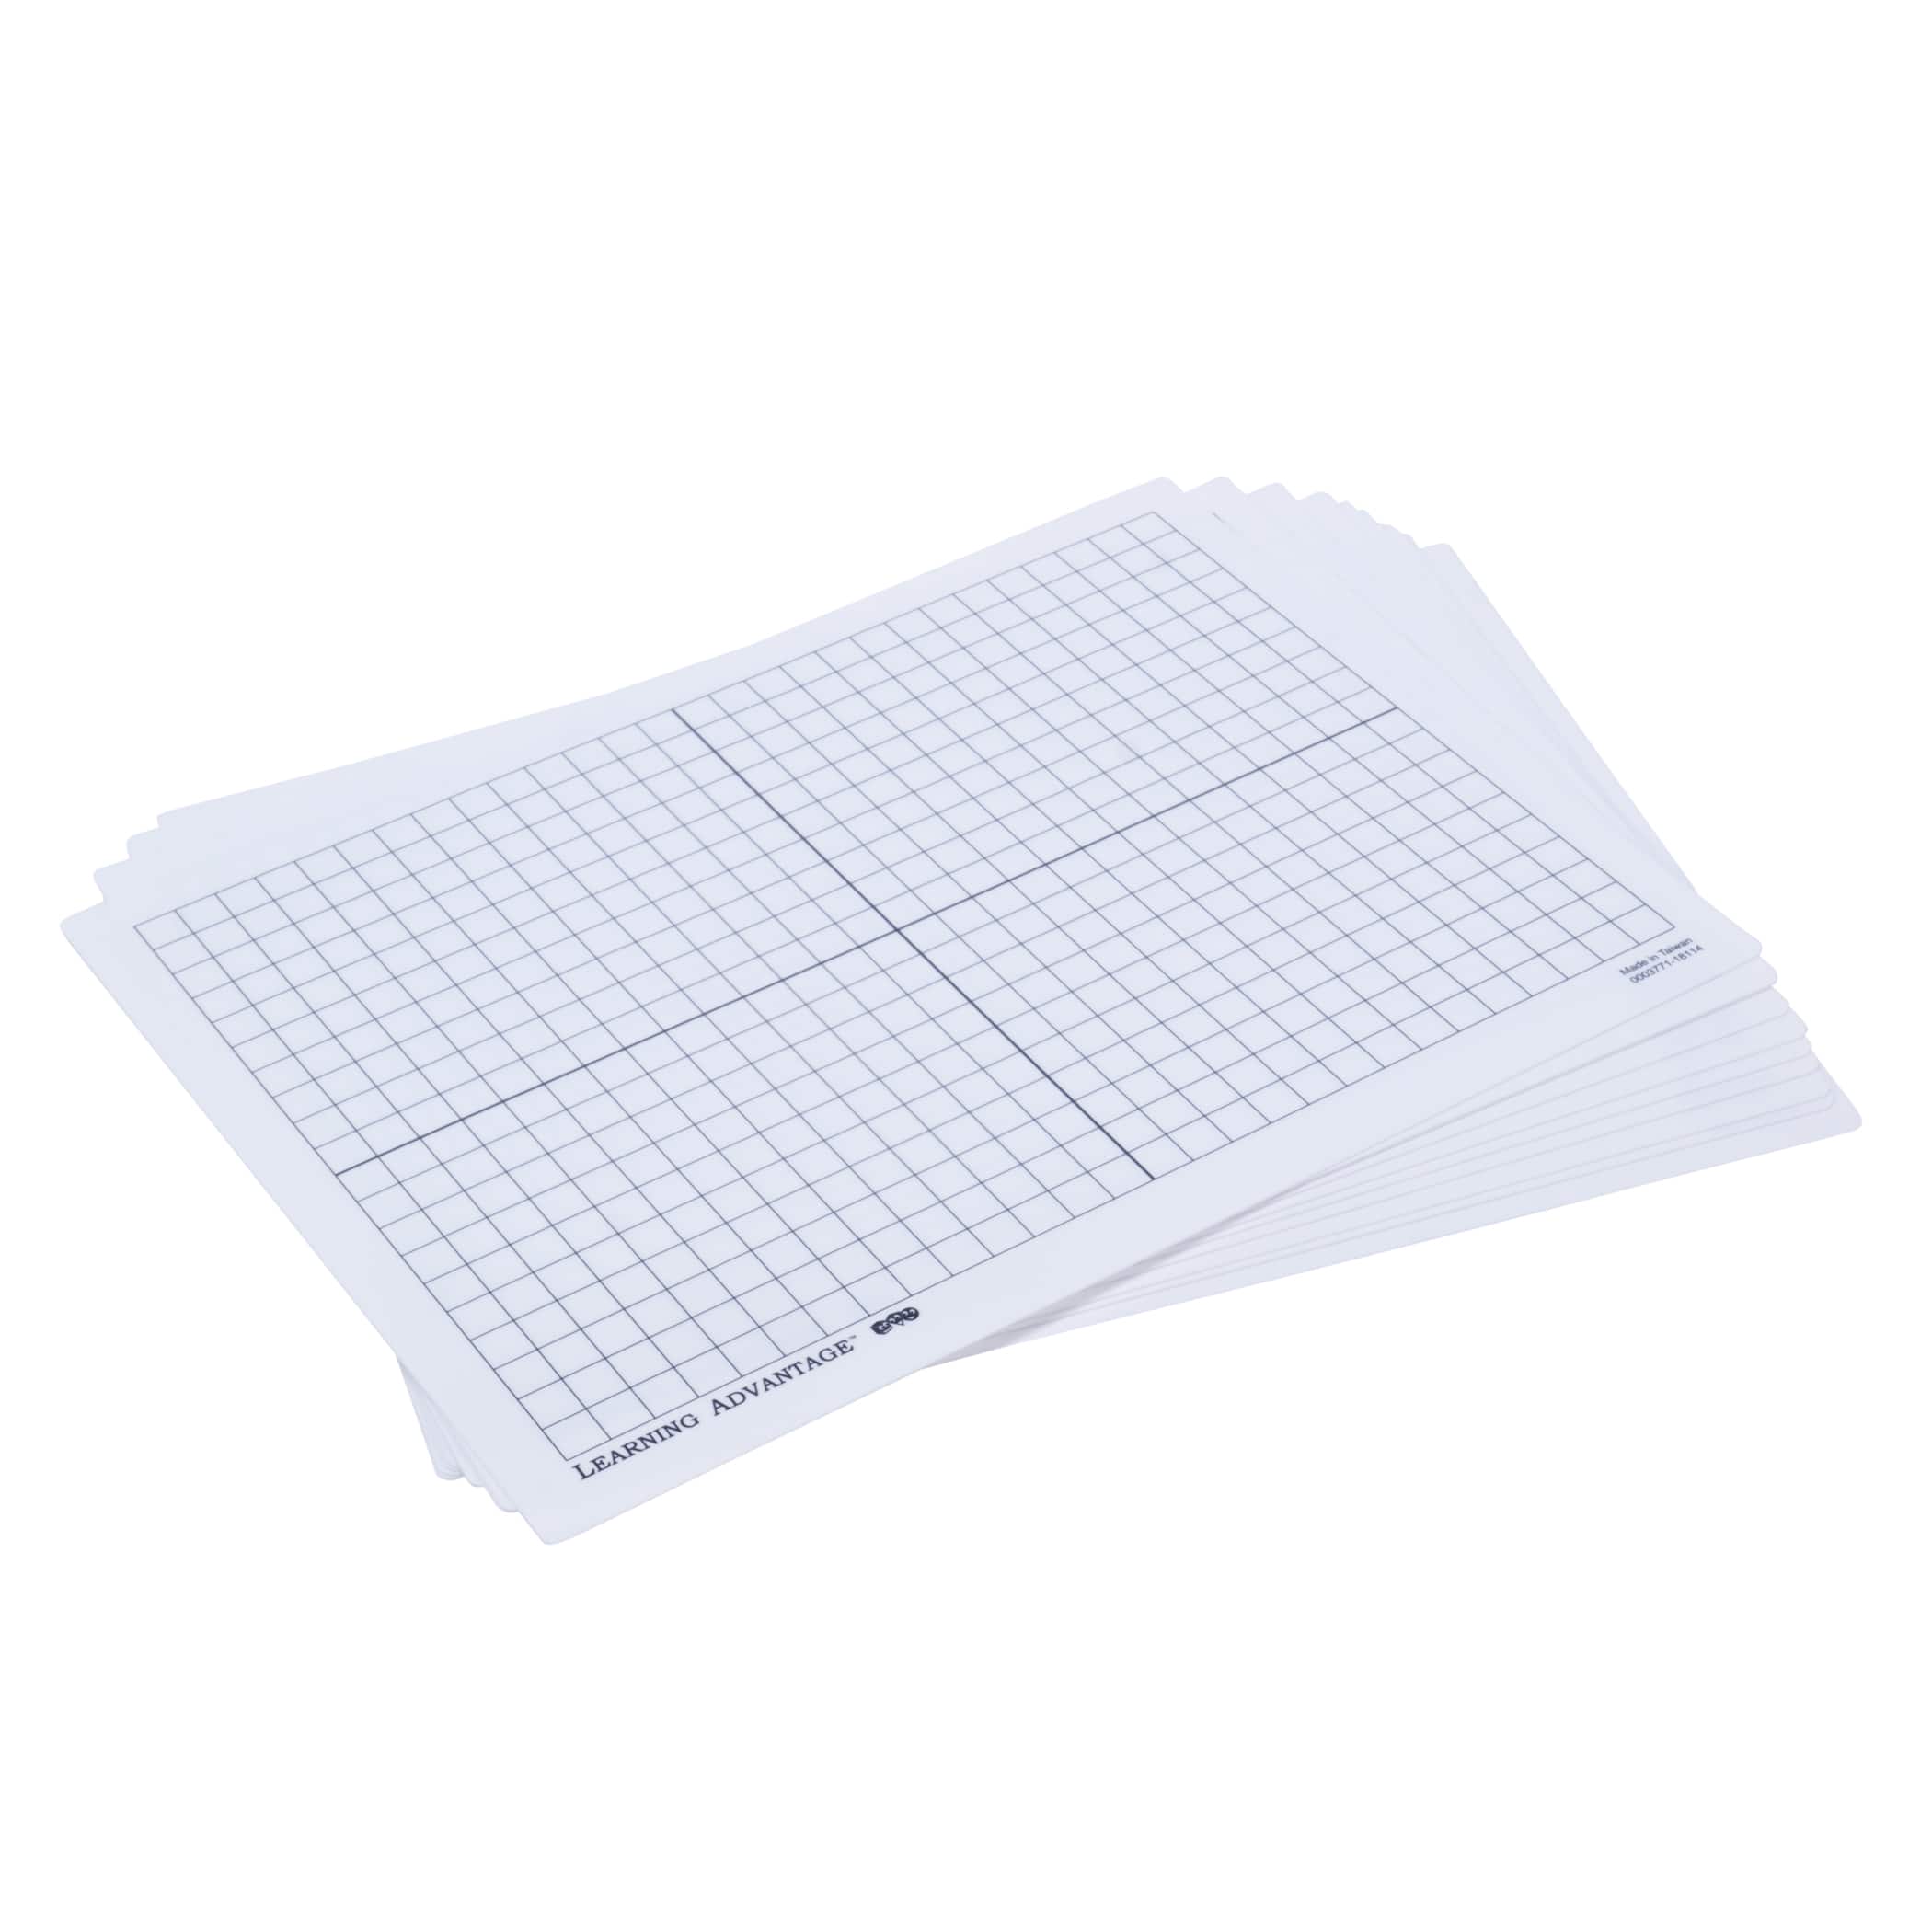 XY Axis Dry Erase Boards, Set of 10